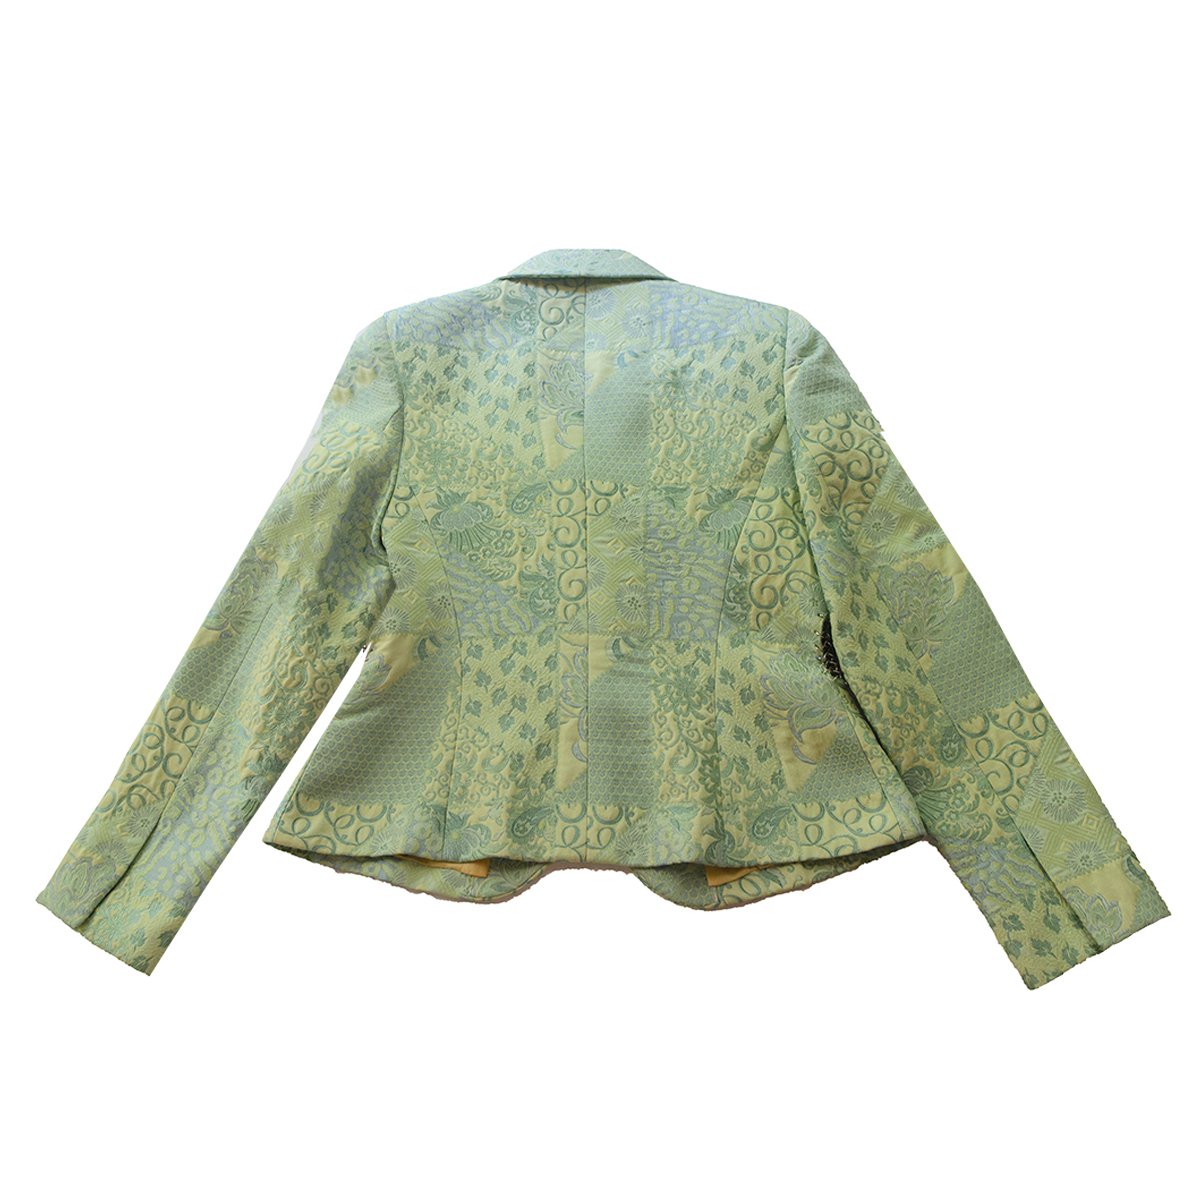 Terry Paris Green Brocade Blazer with Silver Chain Accents, Size Small